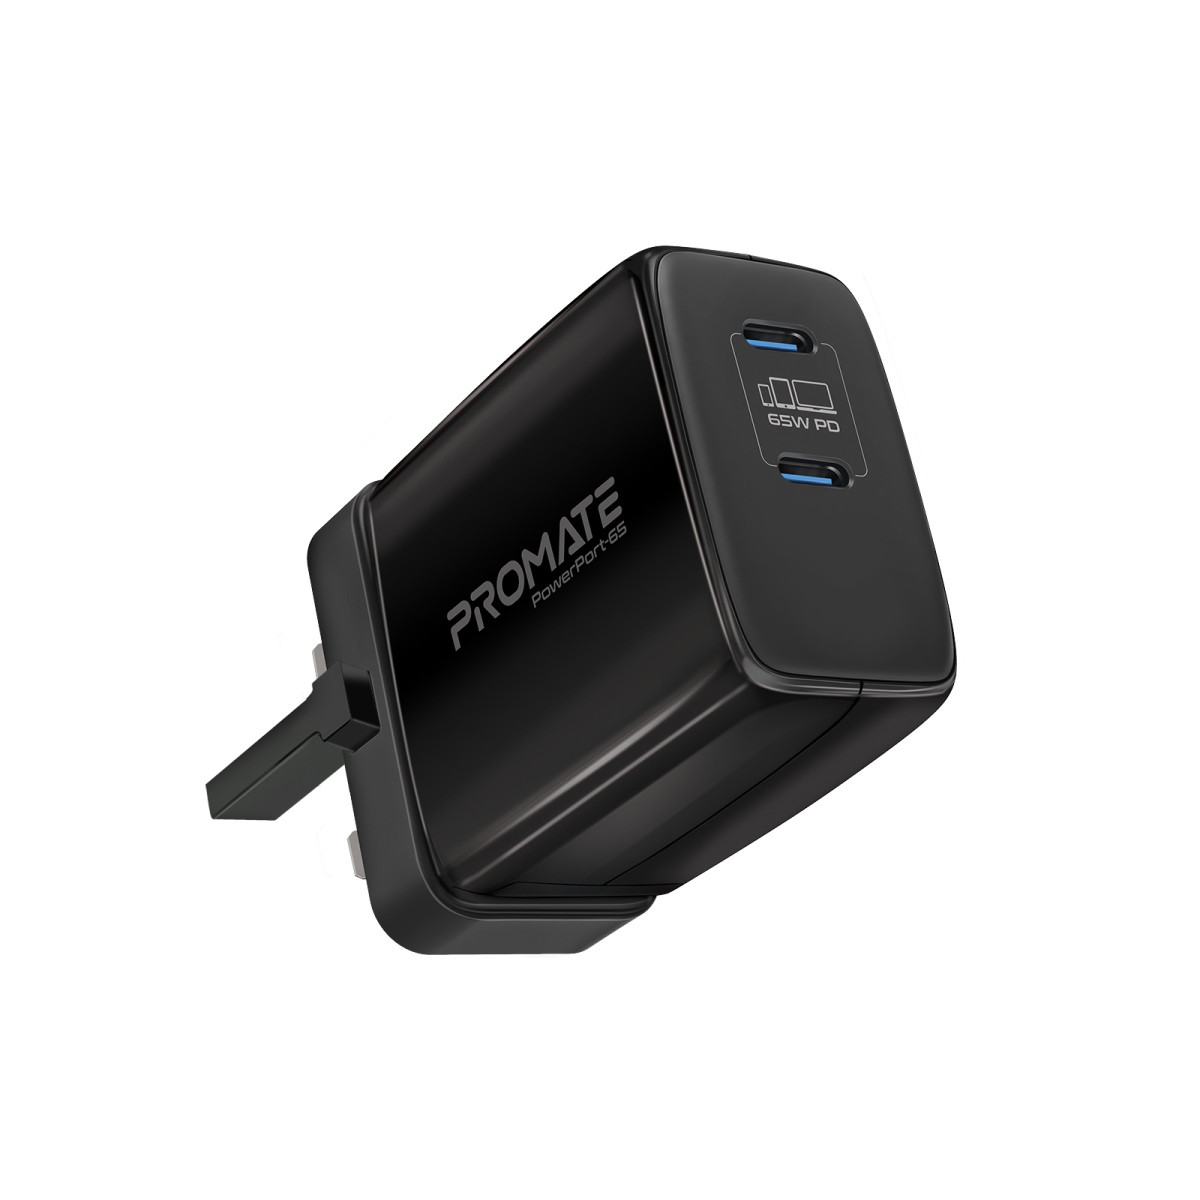 Promate 65W USB-C Power Delivery GaN Charger, Universal Powerful GaN Tech Fast Charger with 2 Type-C Port, Adaptive Charging and Over-Charging Protection for USB-C Powered Devices, POWERPORT-65.UK-BK